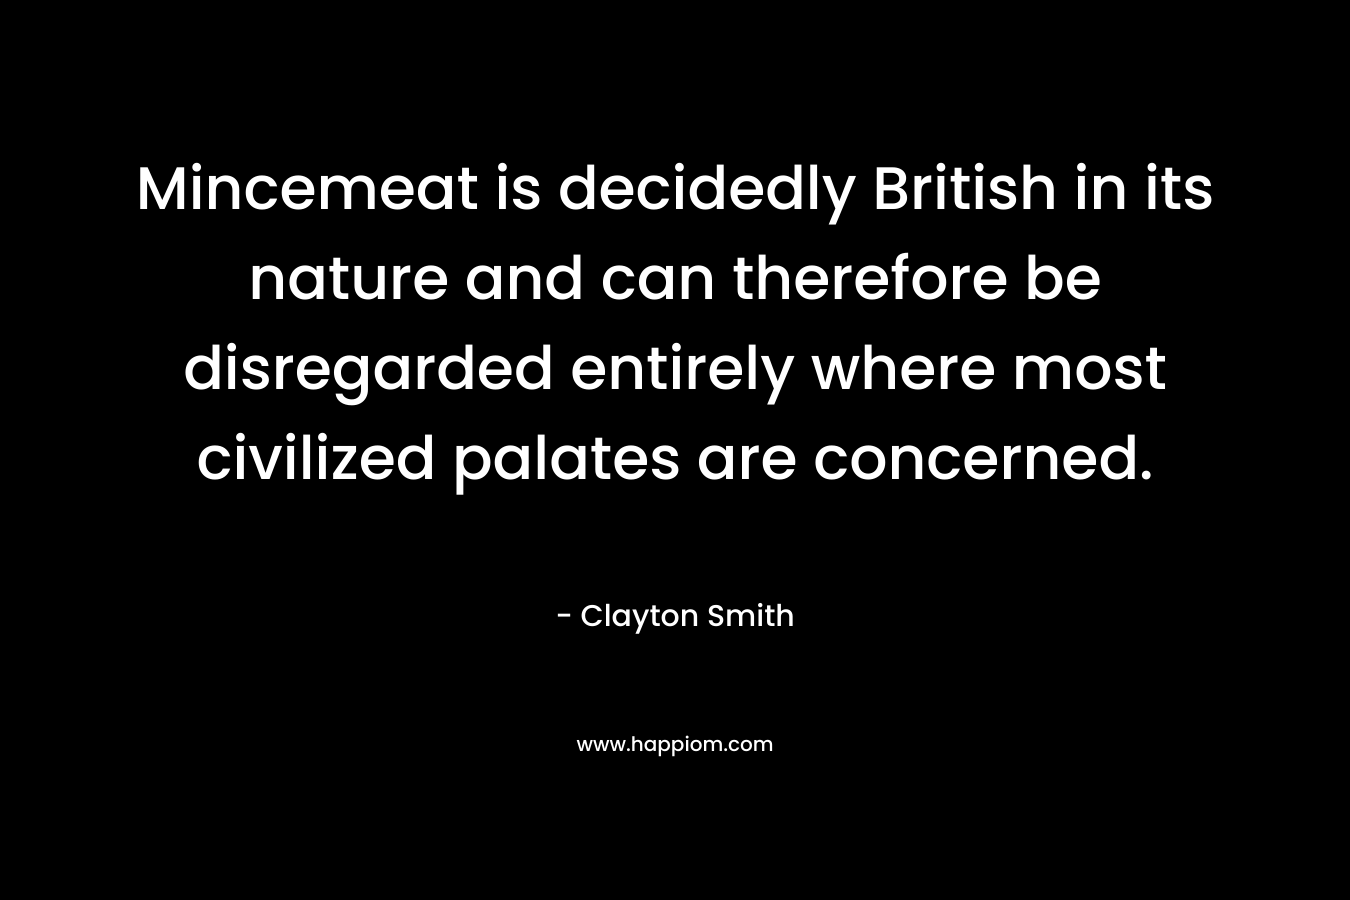 Mincemeat is decidedly British in its nature and can therefore be disregarded entirely where most civilized palates are concerned. – Clayton Smith